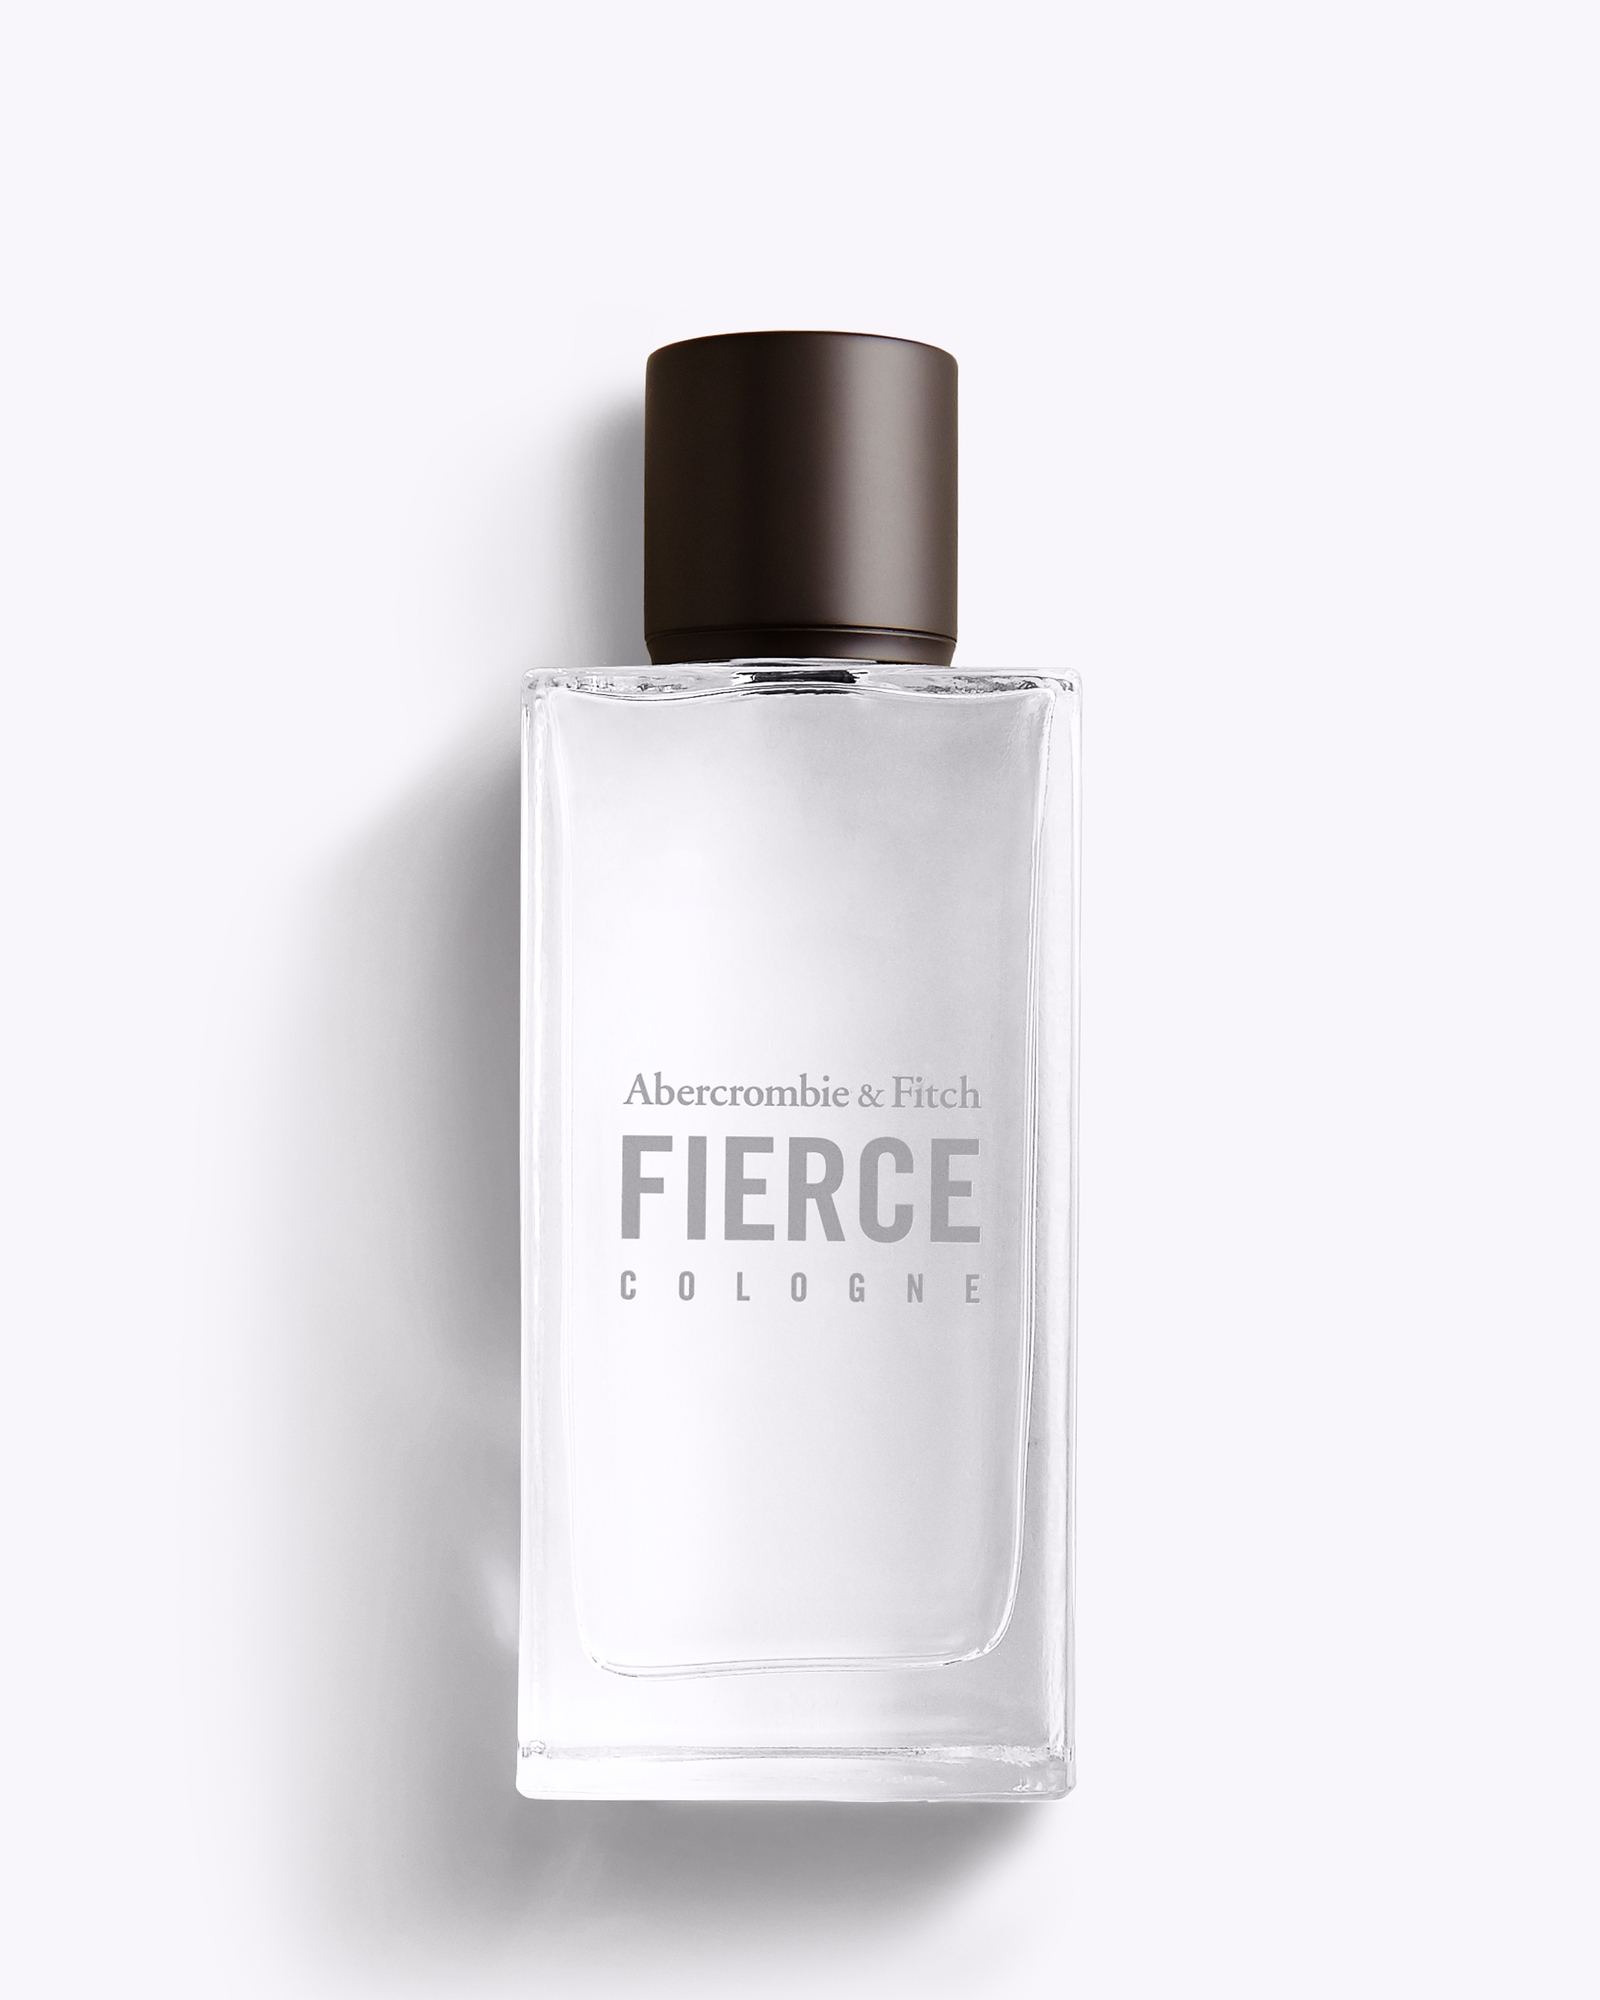 Men's Cologne with Leather Label - Subtle, Cool, Refreshing